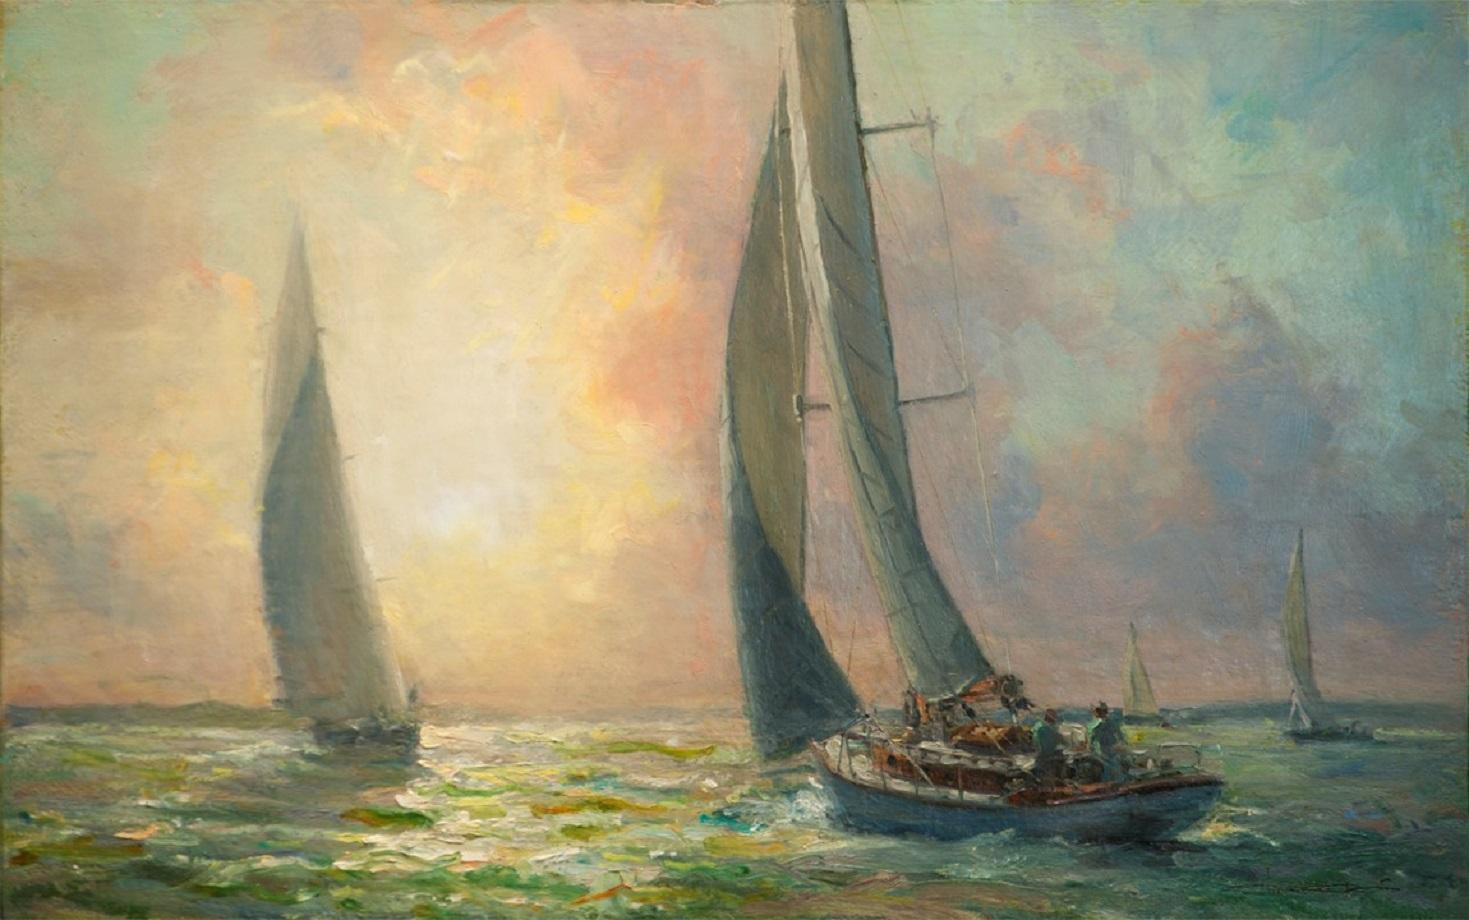 Into the Light, Nantucket Opera House Cup - Painting by Louis Guarnaccia